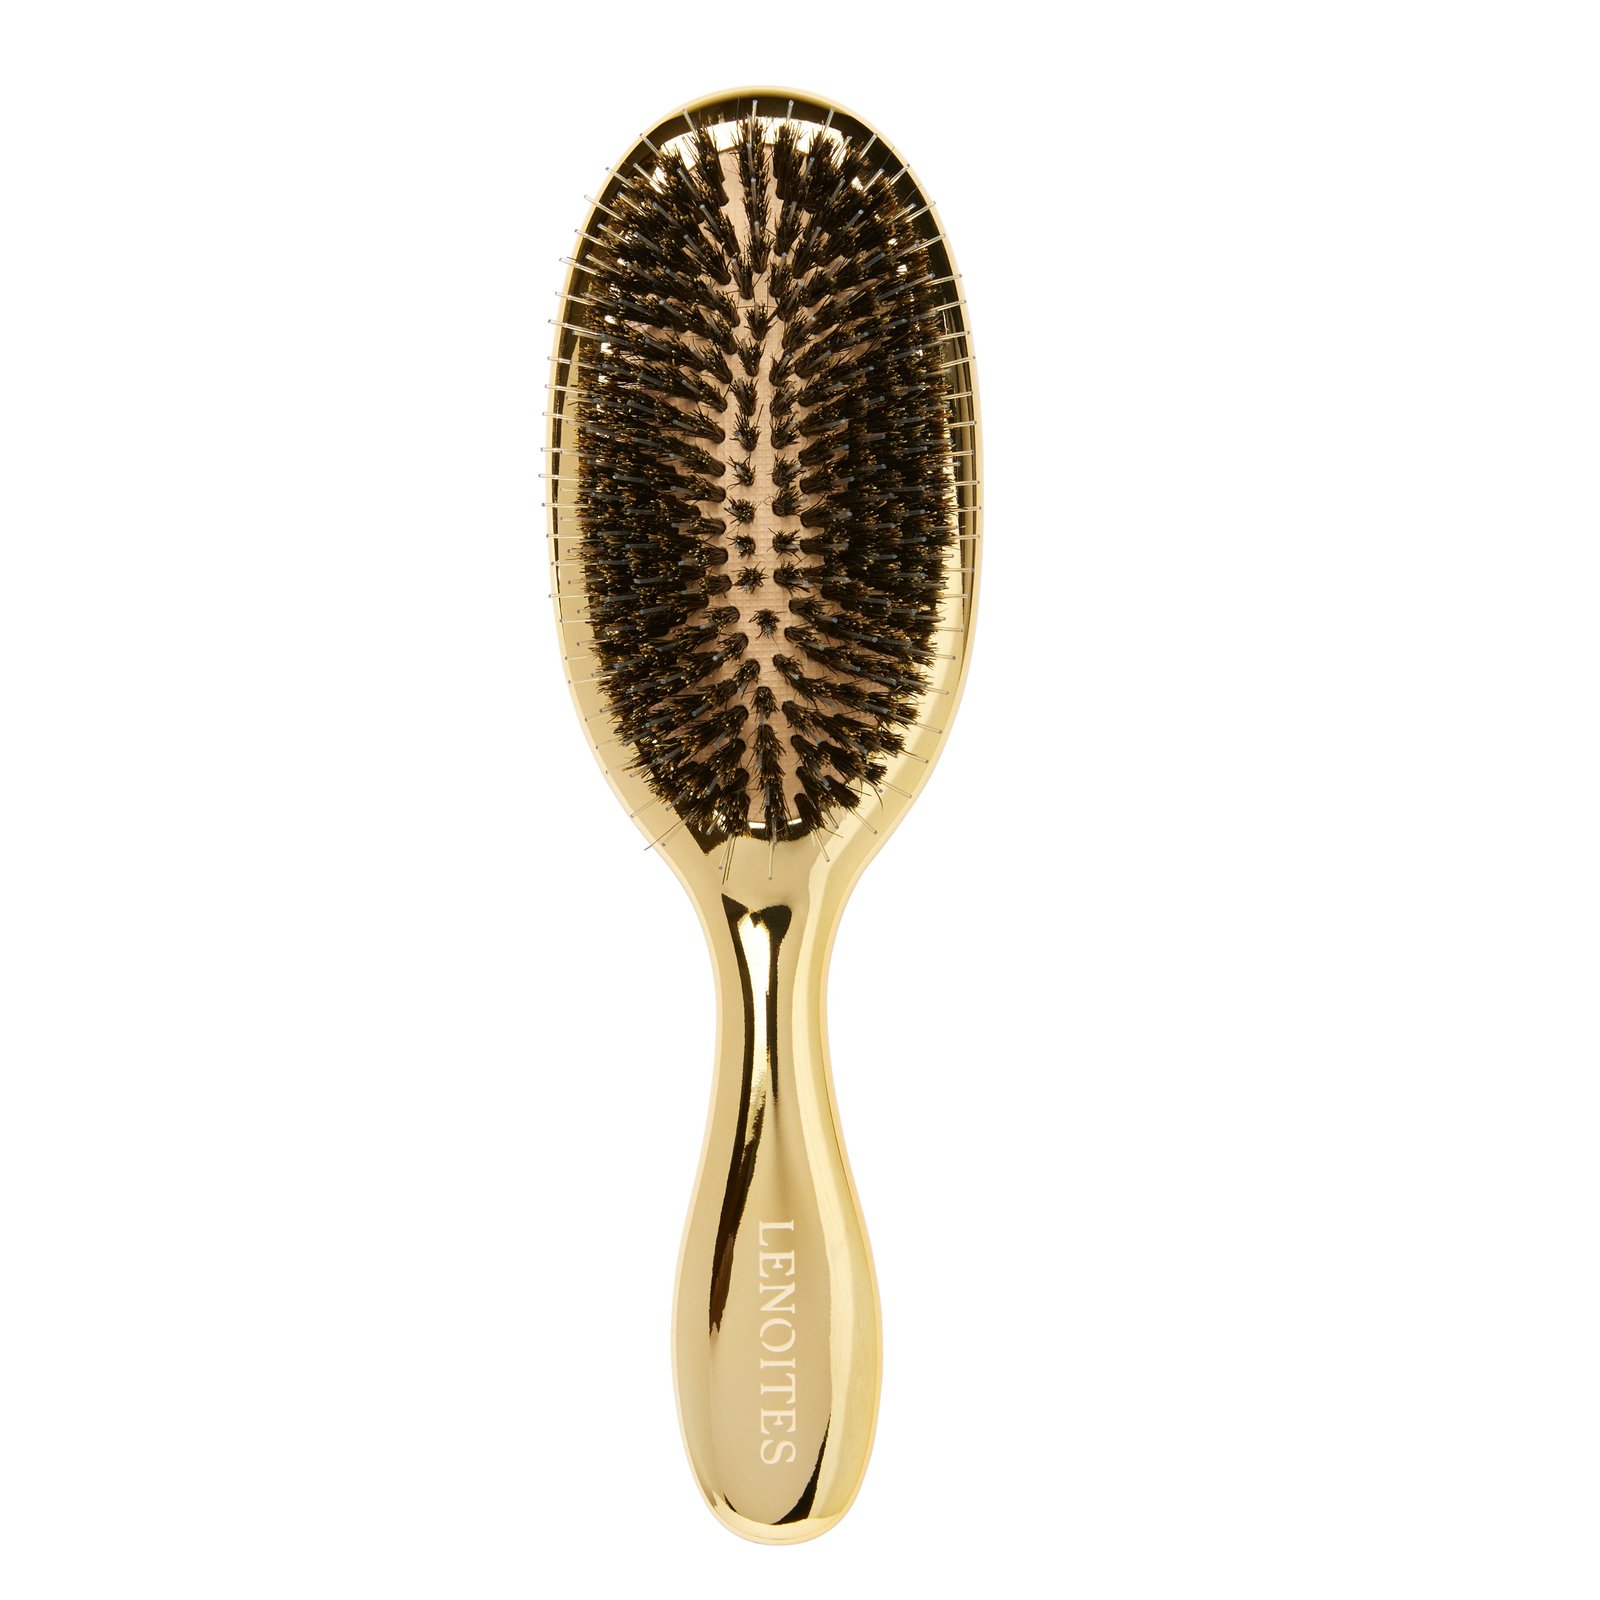 LENOITES Hair Brush Wild Boar With Pouch & Cleaner Tool Gold 1 st